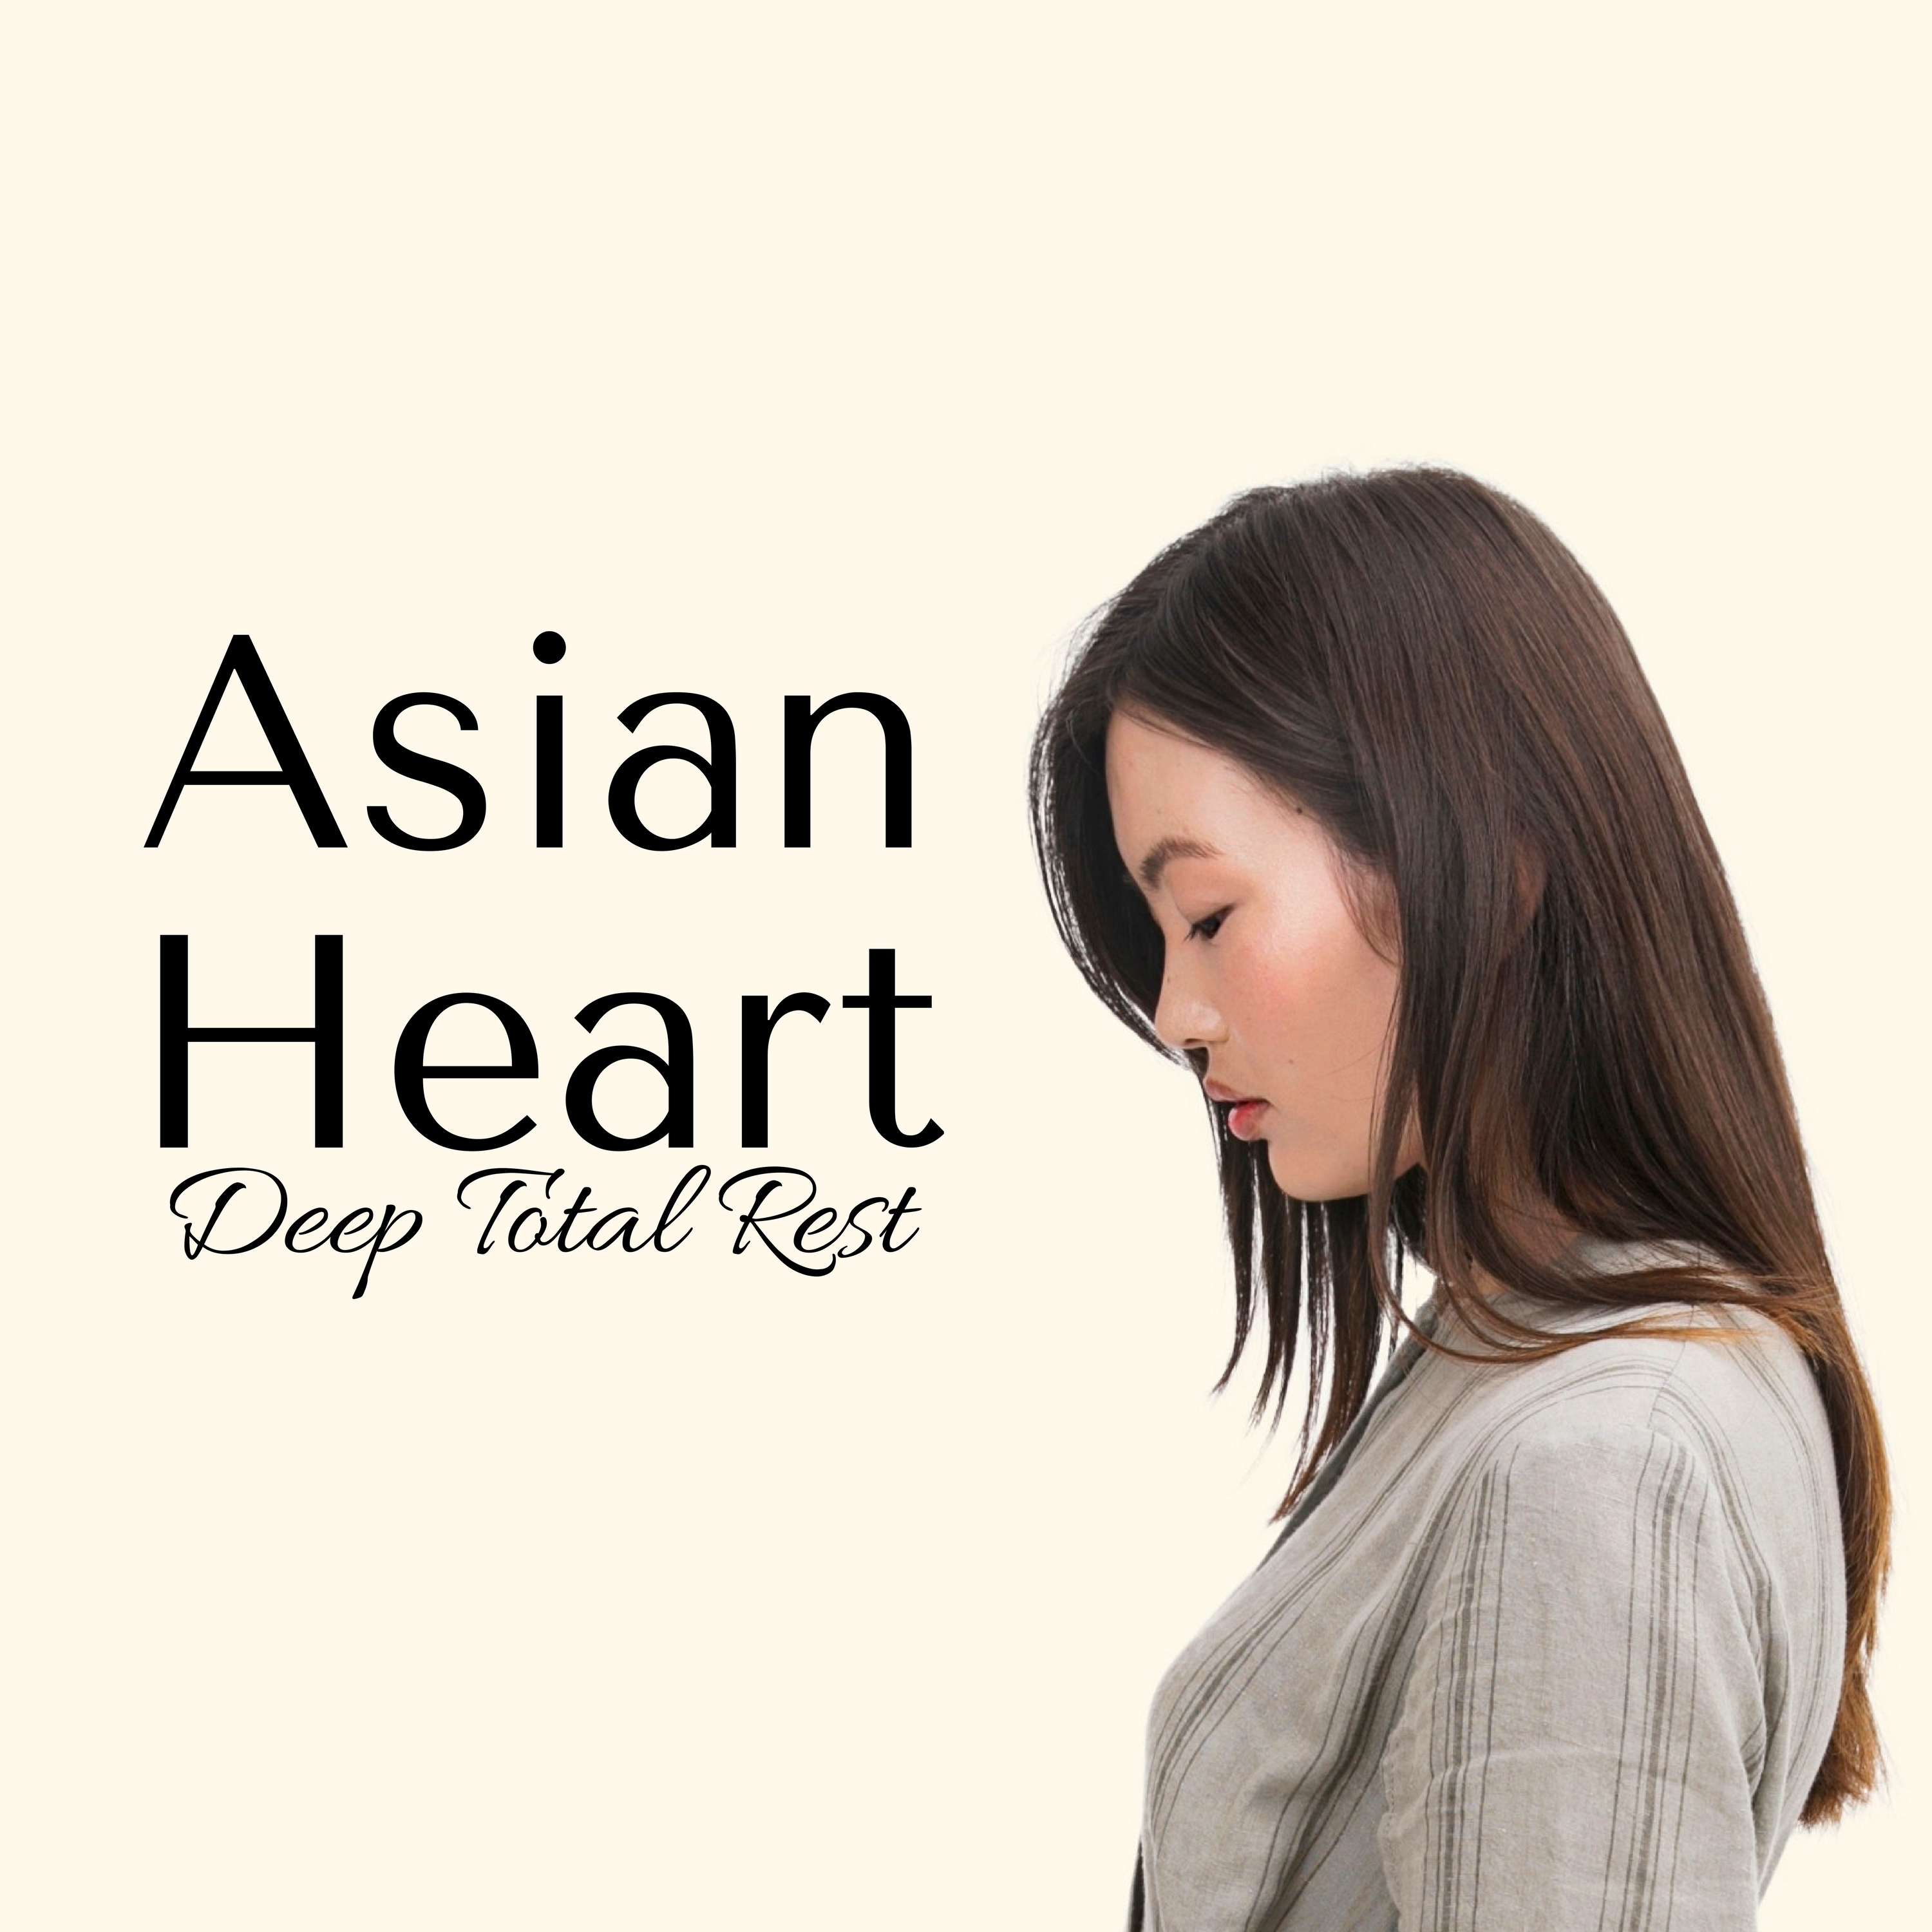 Asian Heart: Deep Total Rest, Relaxing New Age Music, Sounds of Nature for Daily Yoga